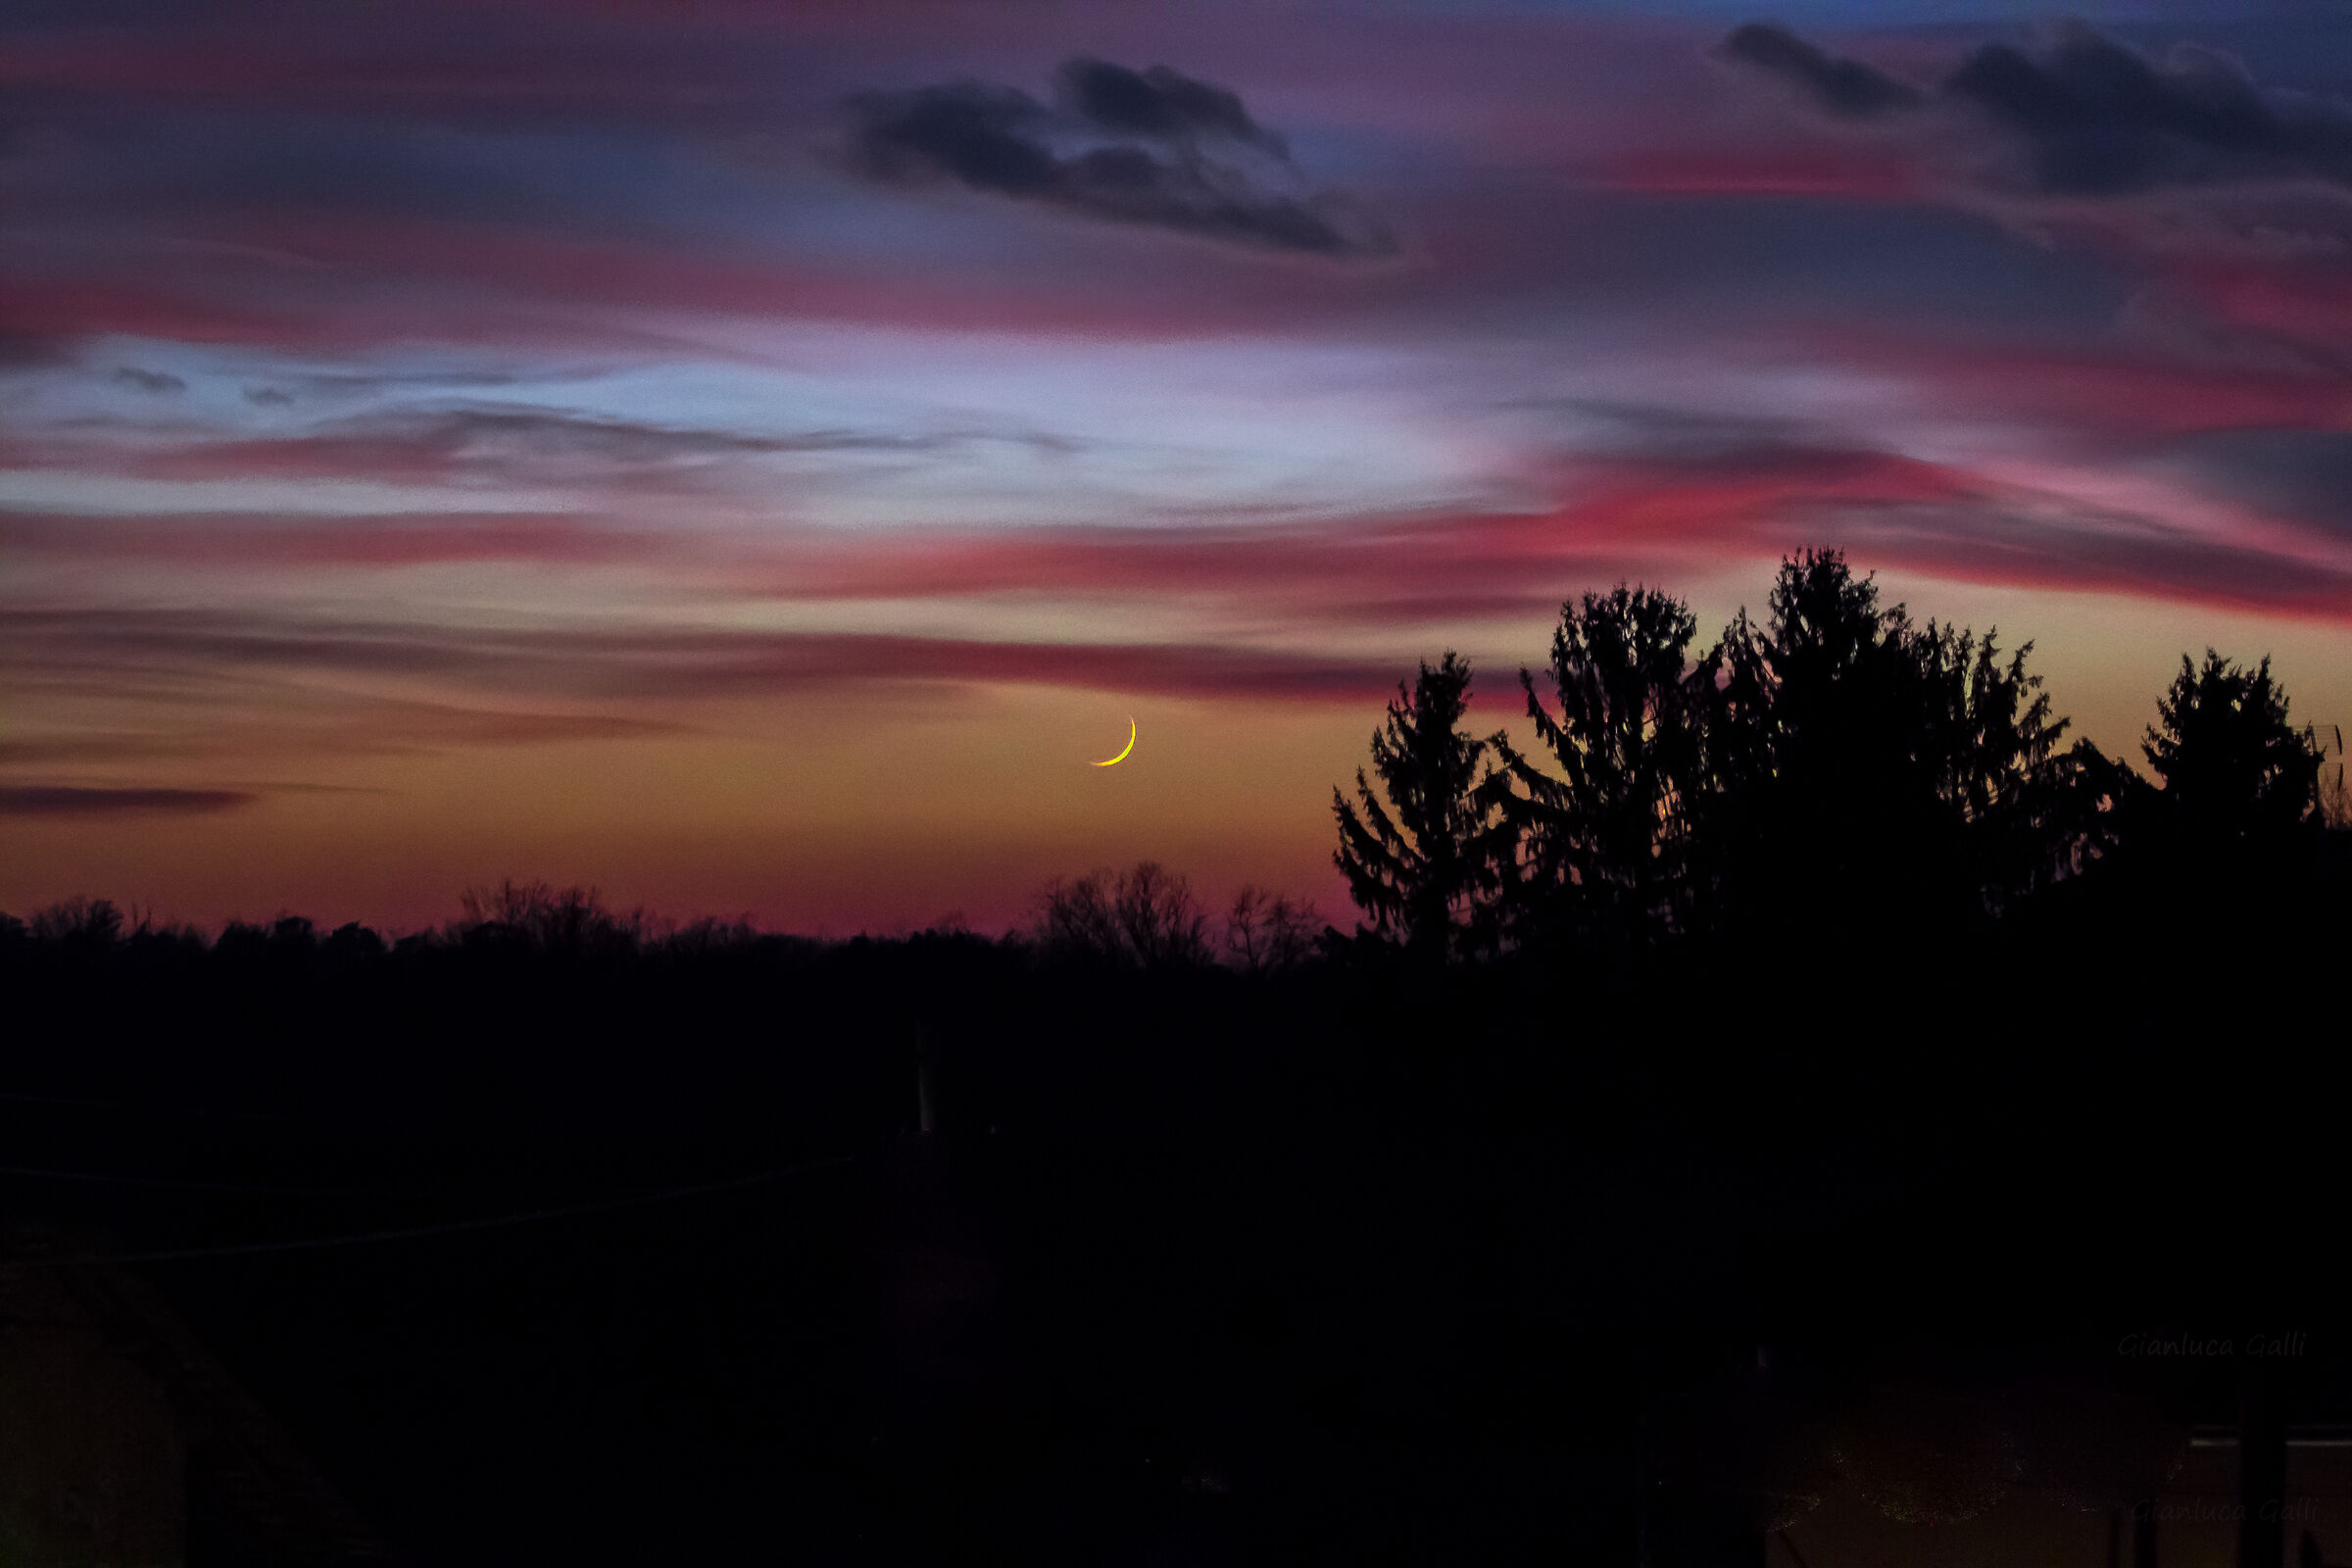 New moon in the sunset...